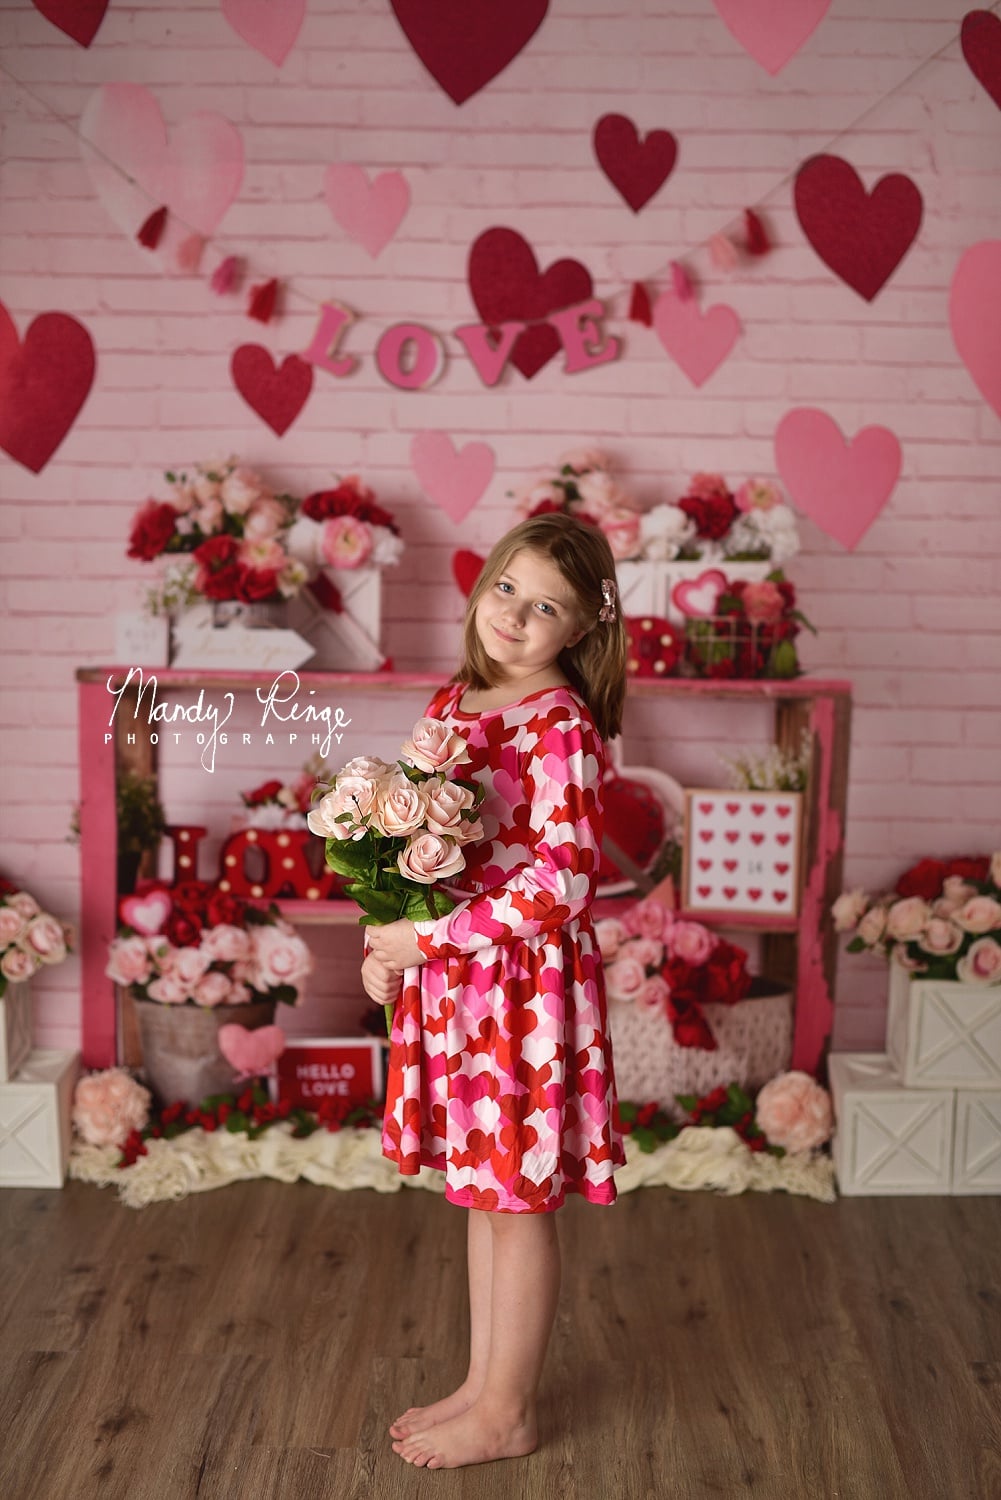 Kate Valentine's Day Love Heart Backdrop Designed by Mandy Ringe Photography